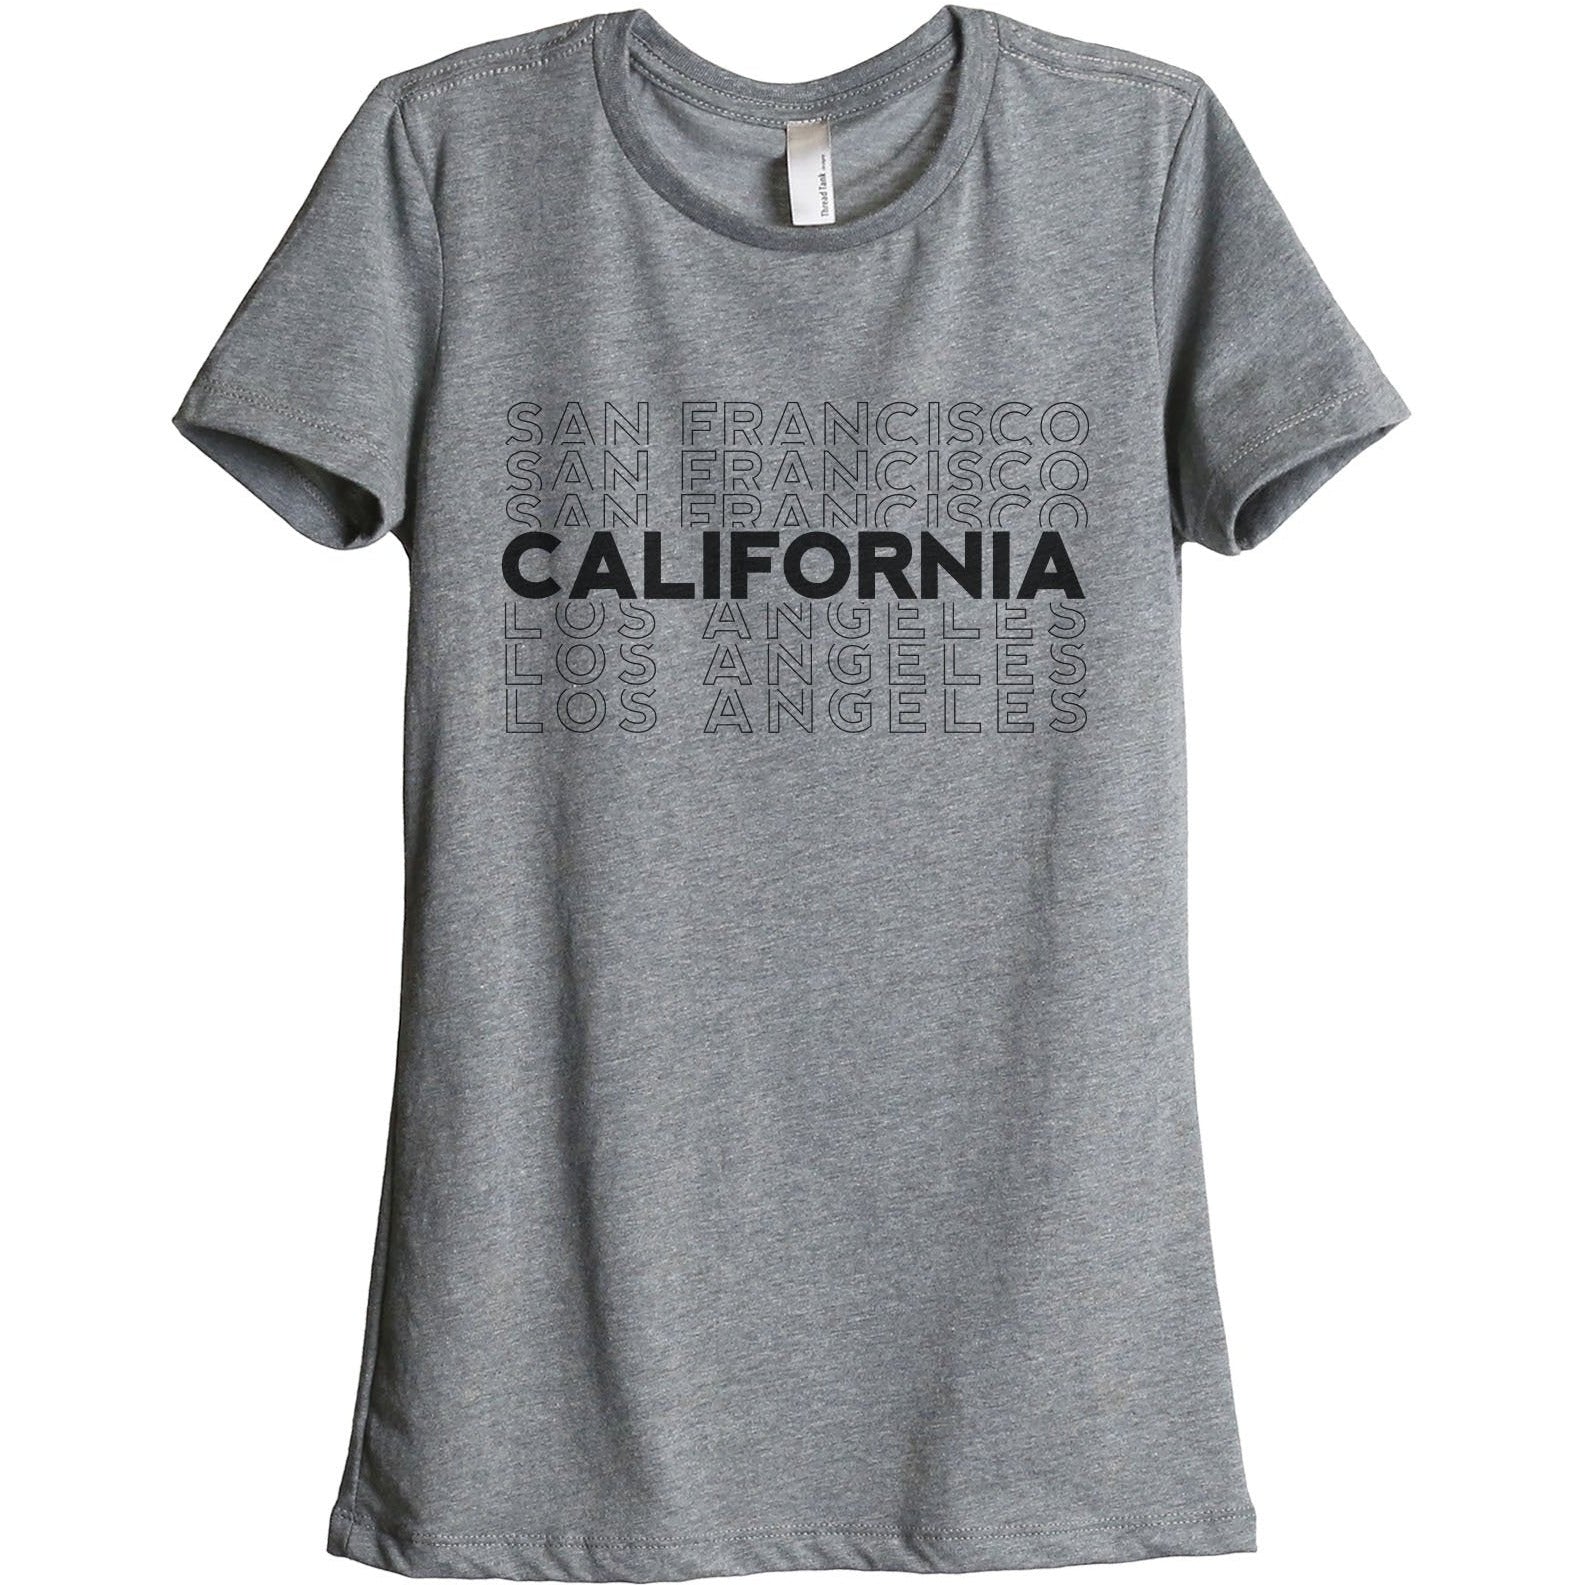 California SF to LA - Thread Tank | Stories You Can Wear | T-Shirts, Tank Tops and Sweatshirts